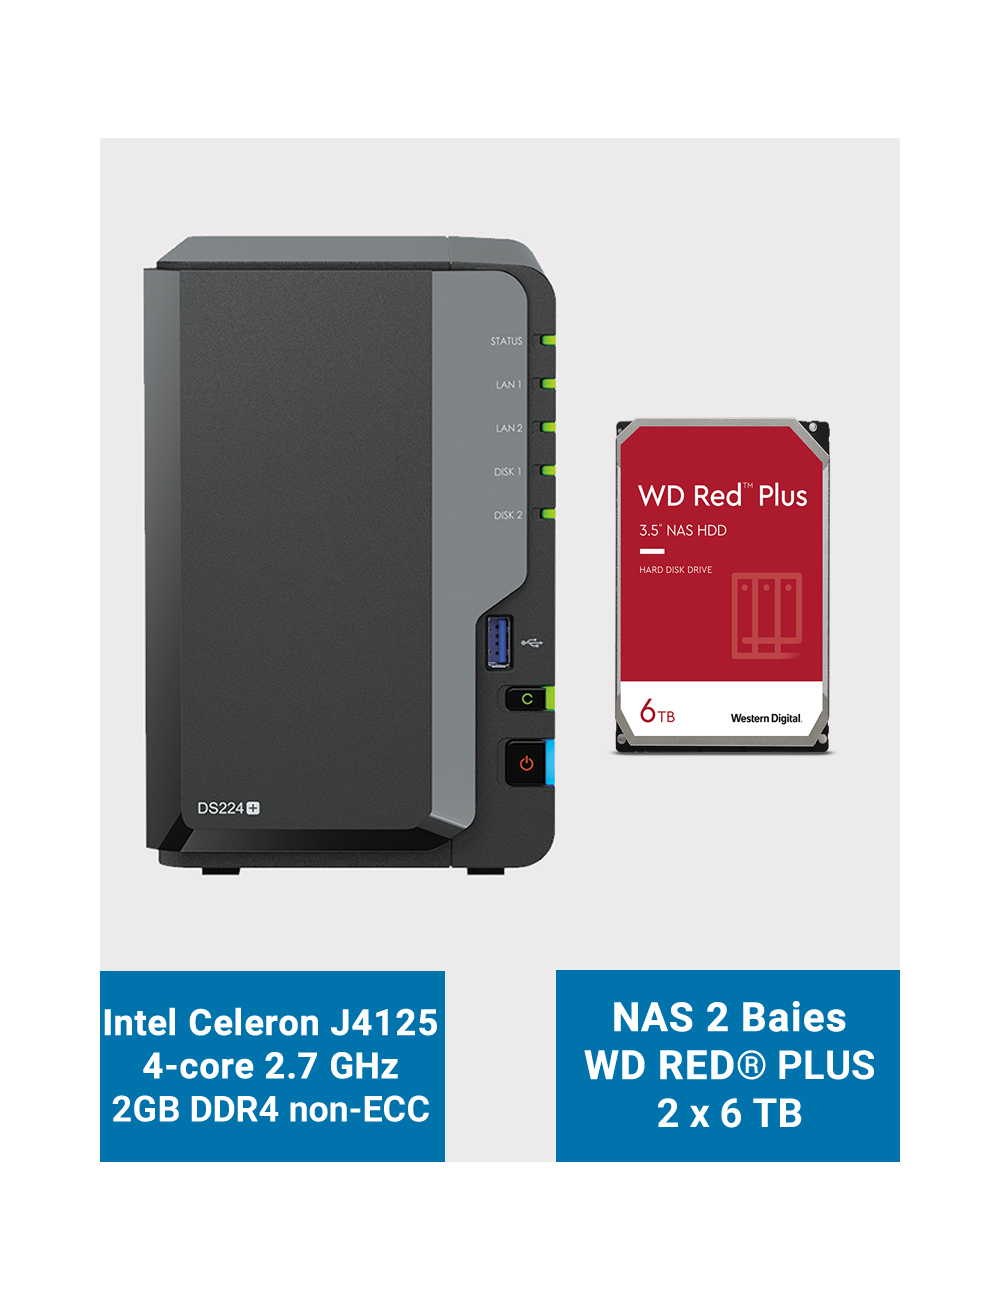 Synology DiskStation DS224+ 2GB NAS Server WD RED PLUS 12TB (2x6TB)